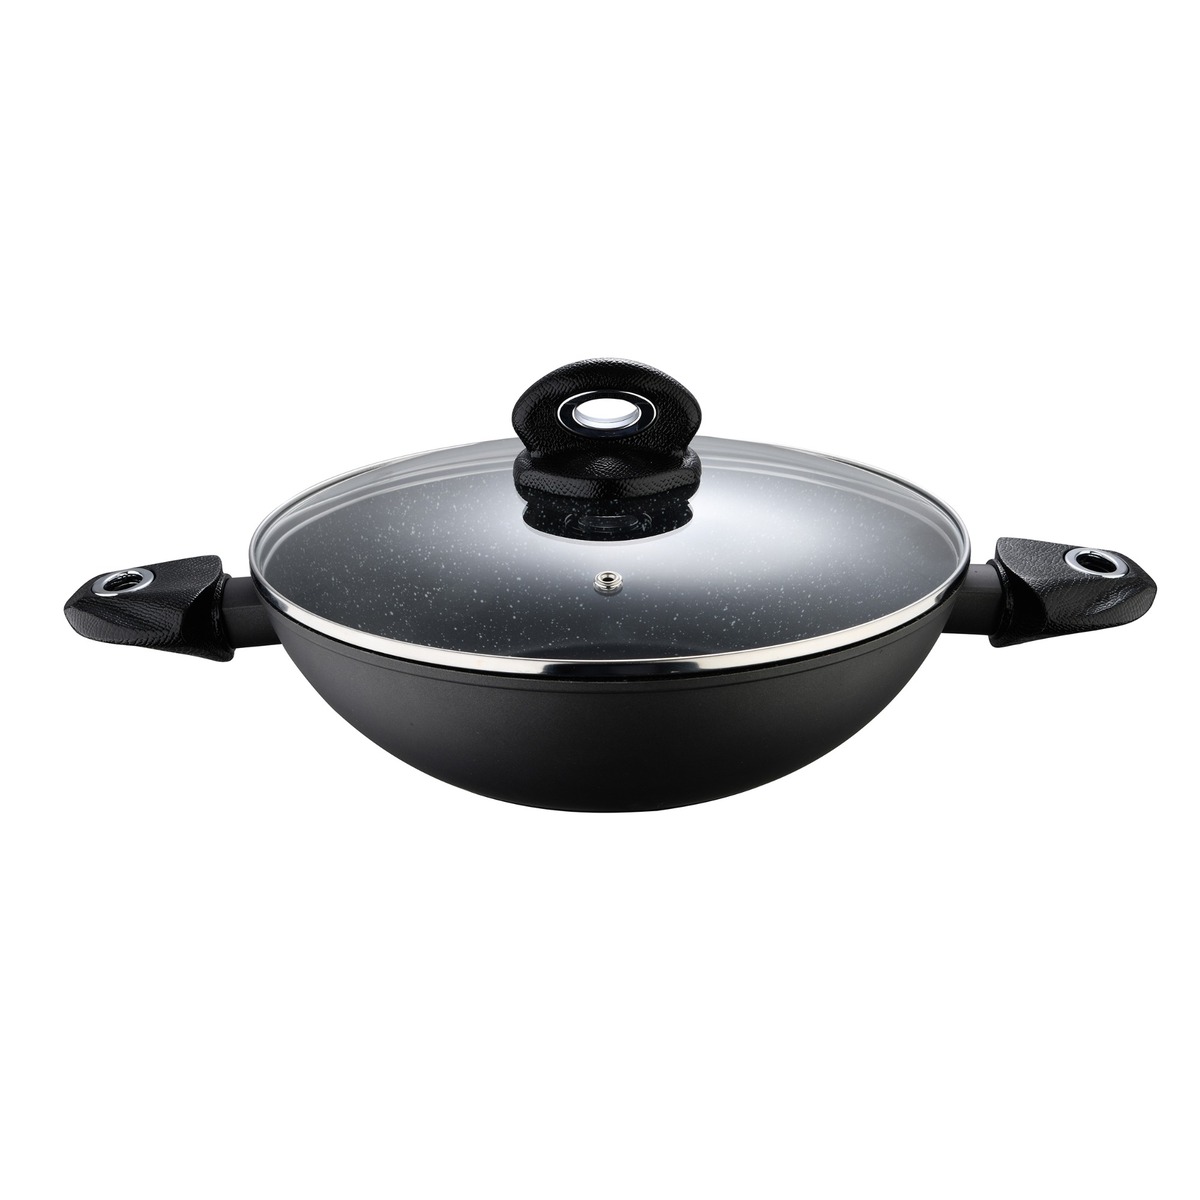 Bergner Orion Forged Aluminum Non-Stick Kadai with Lid, 28 x 7.8 cm, Black, BG35859GY